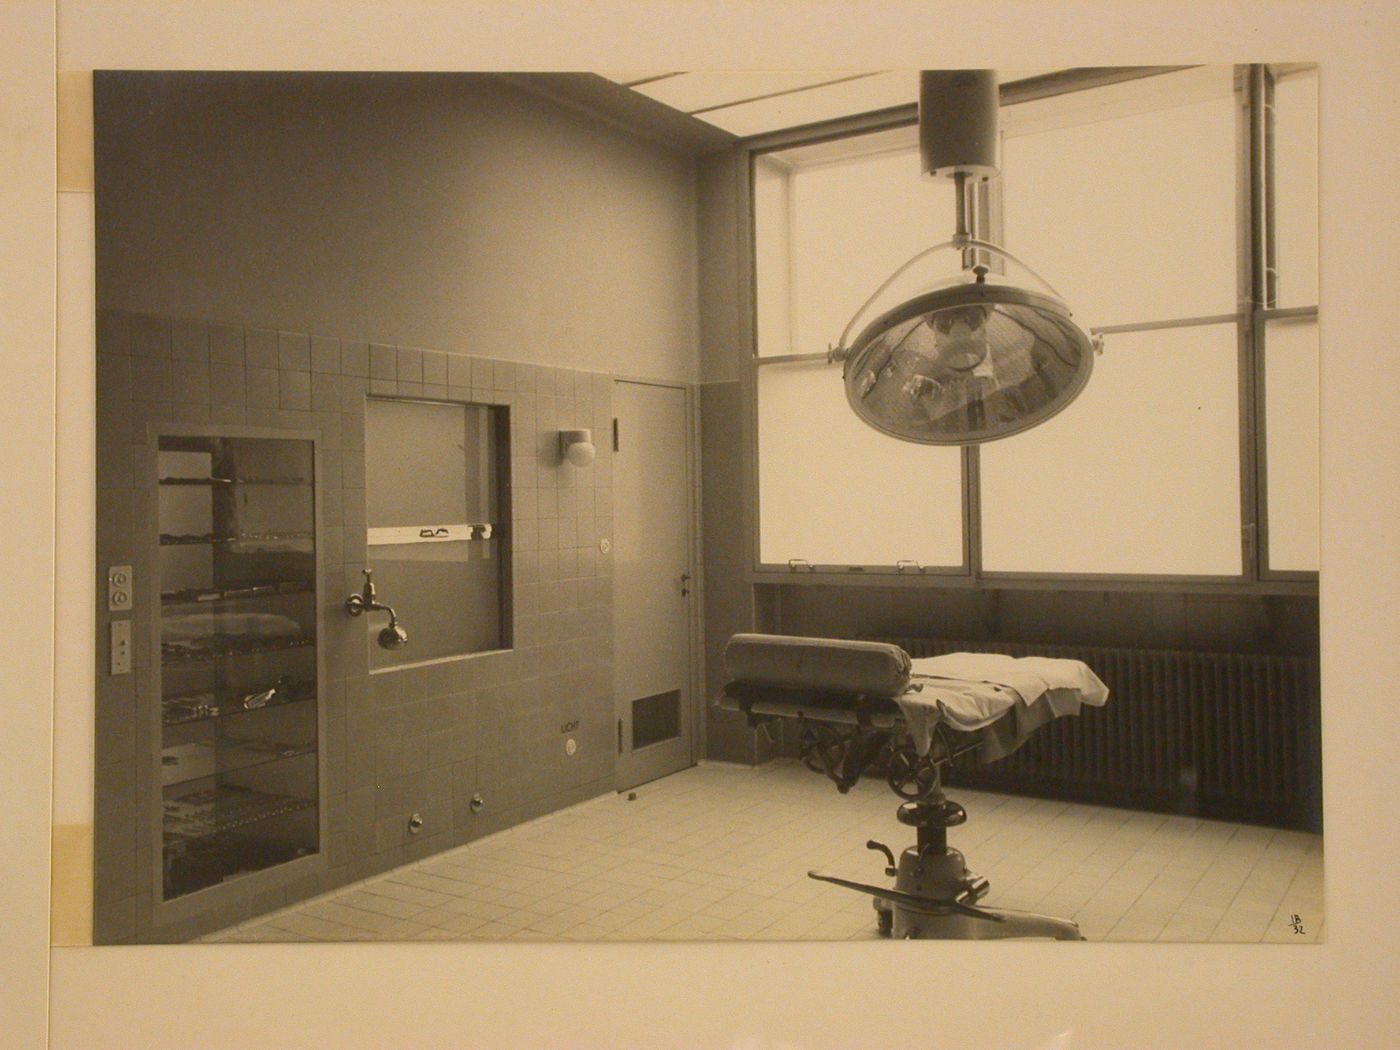 Interior view of an operating room in the Rothschildsches Krankenhaus [hospital] showing an operating table and a lamp, Frankfurt am Main, Germany